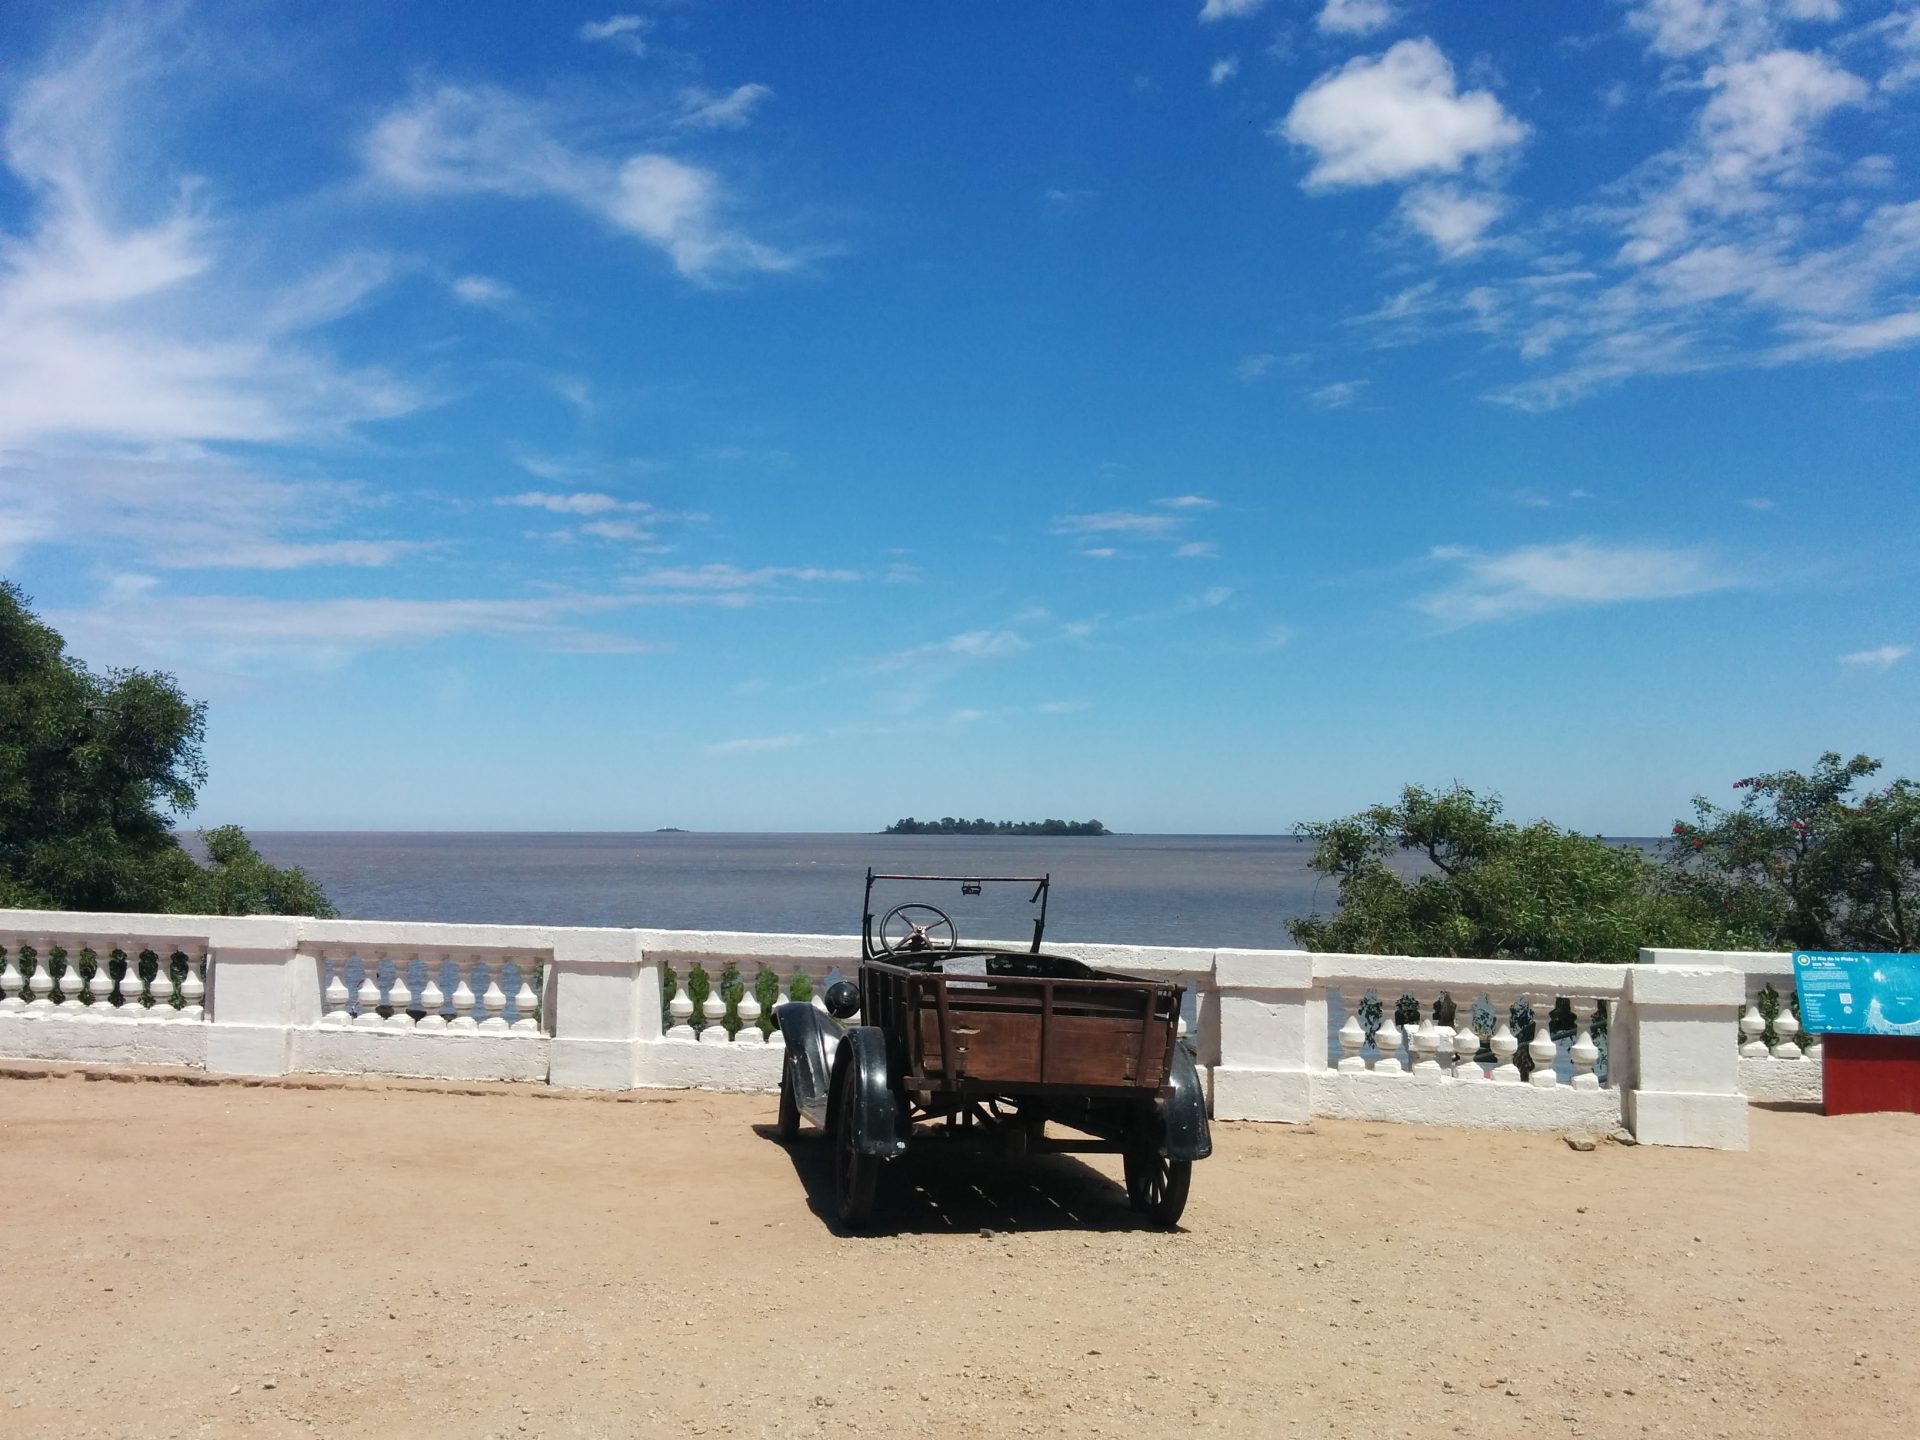 A view of the river with an old car